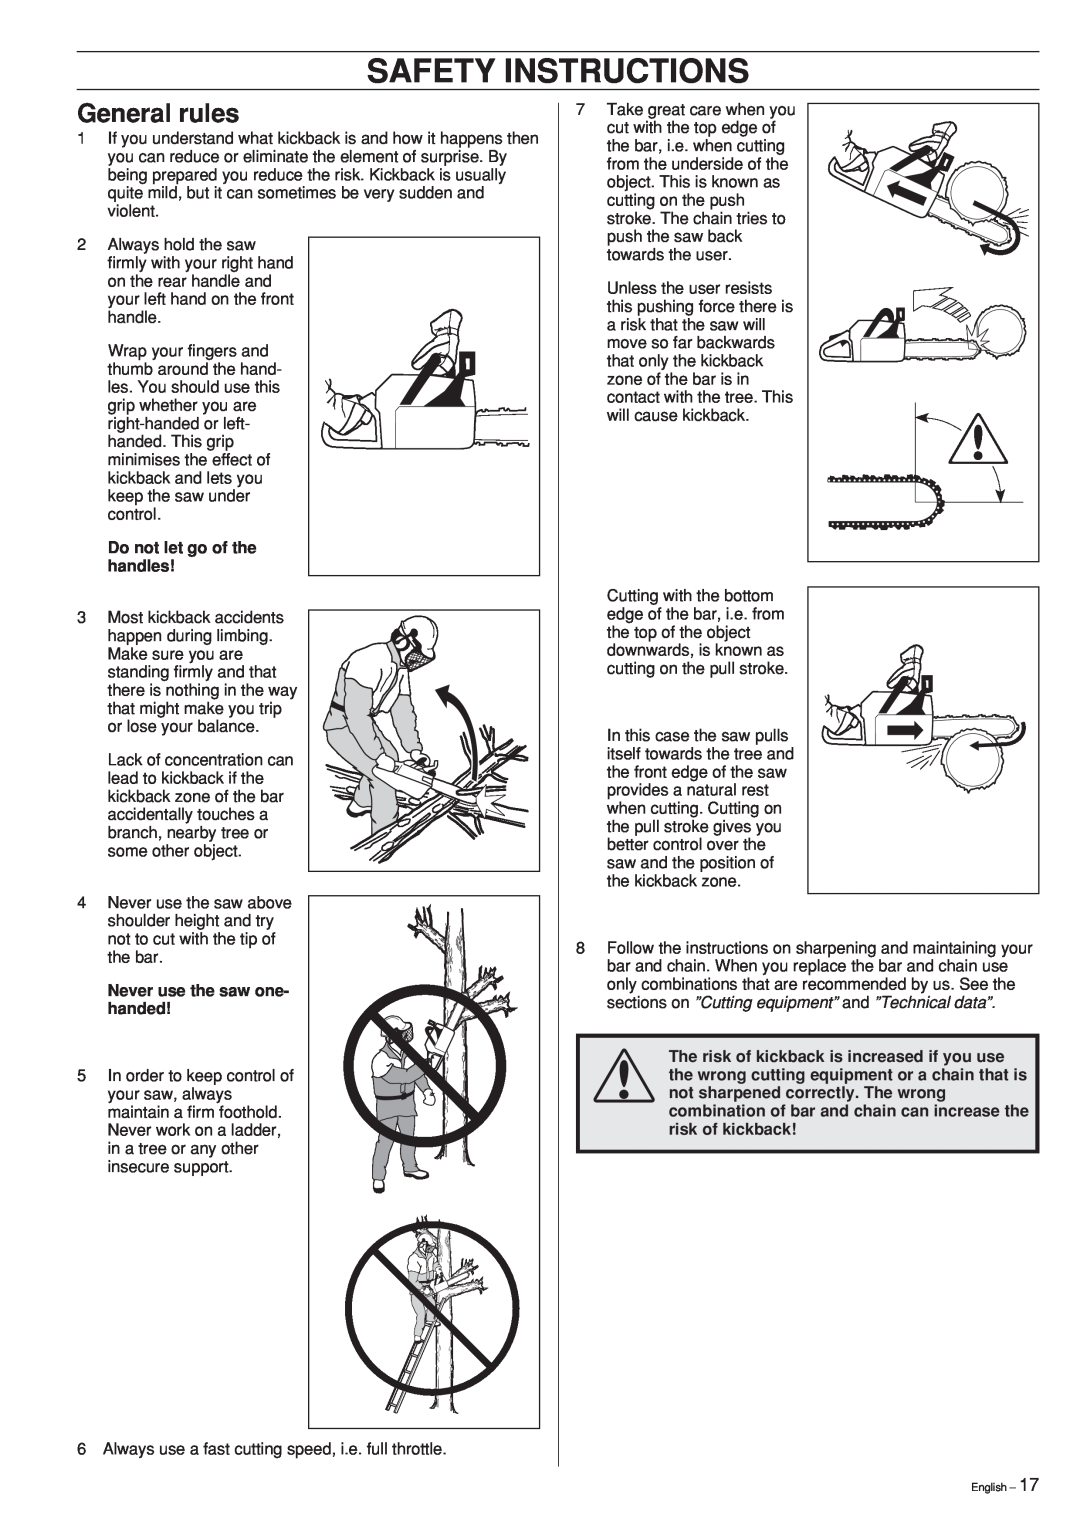 Husqvarna 55 manual Safety Instructions, General rules, Do not let go of the handles, Never use the saw one- handed 